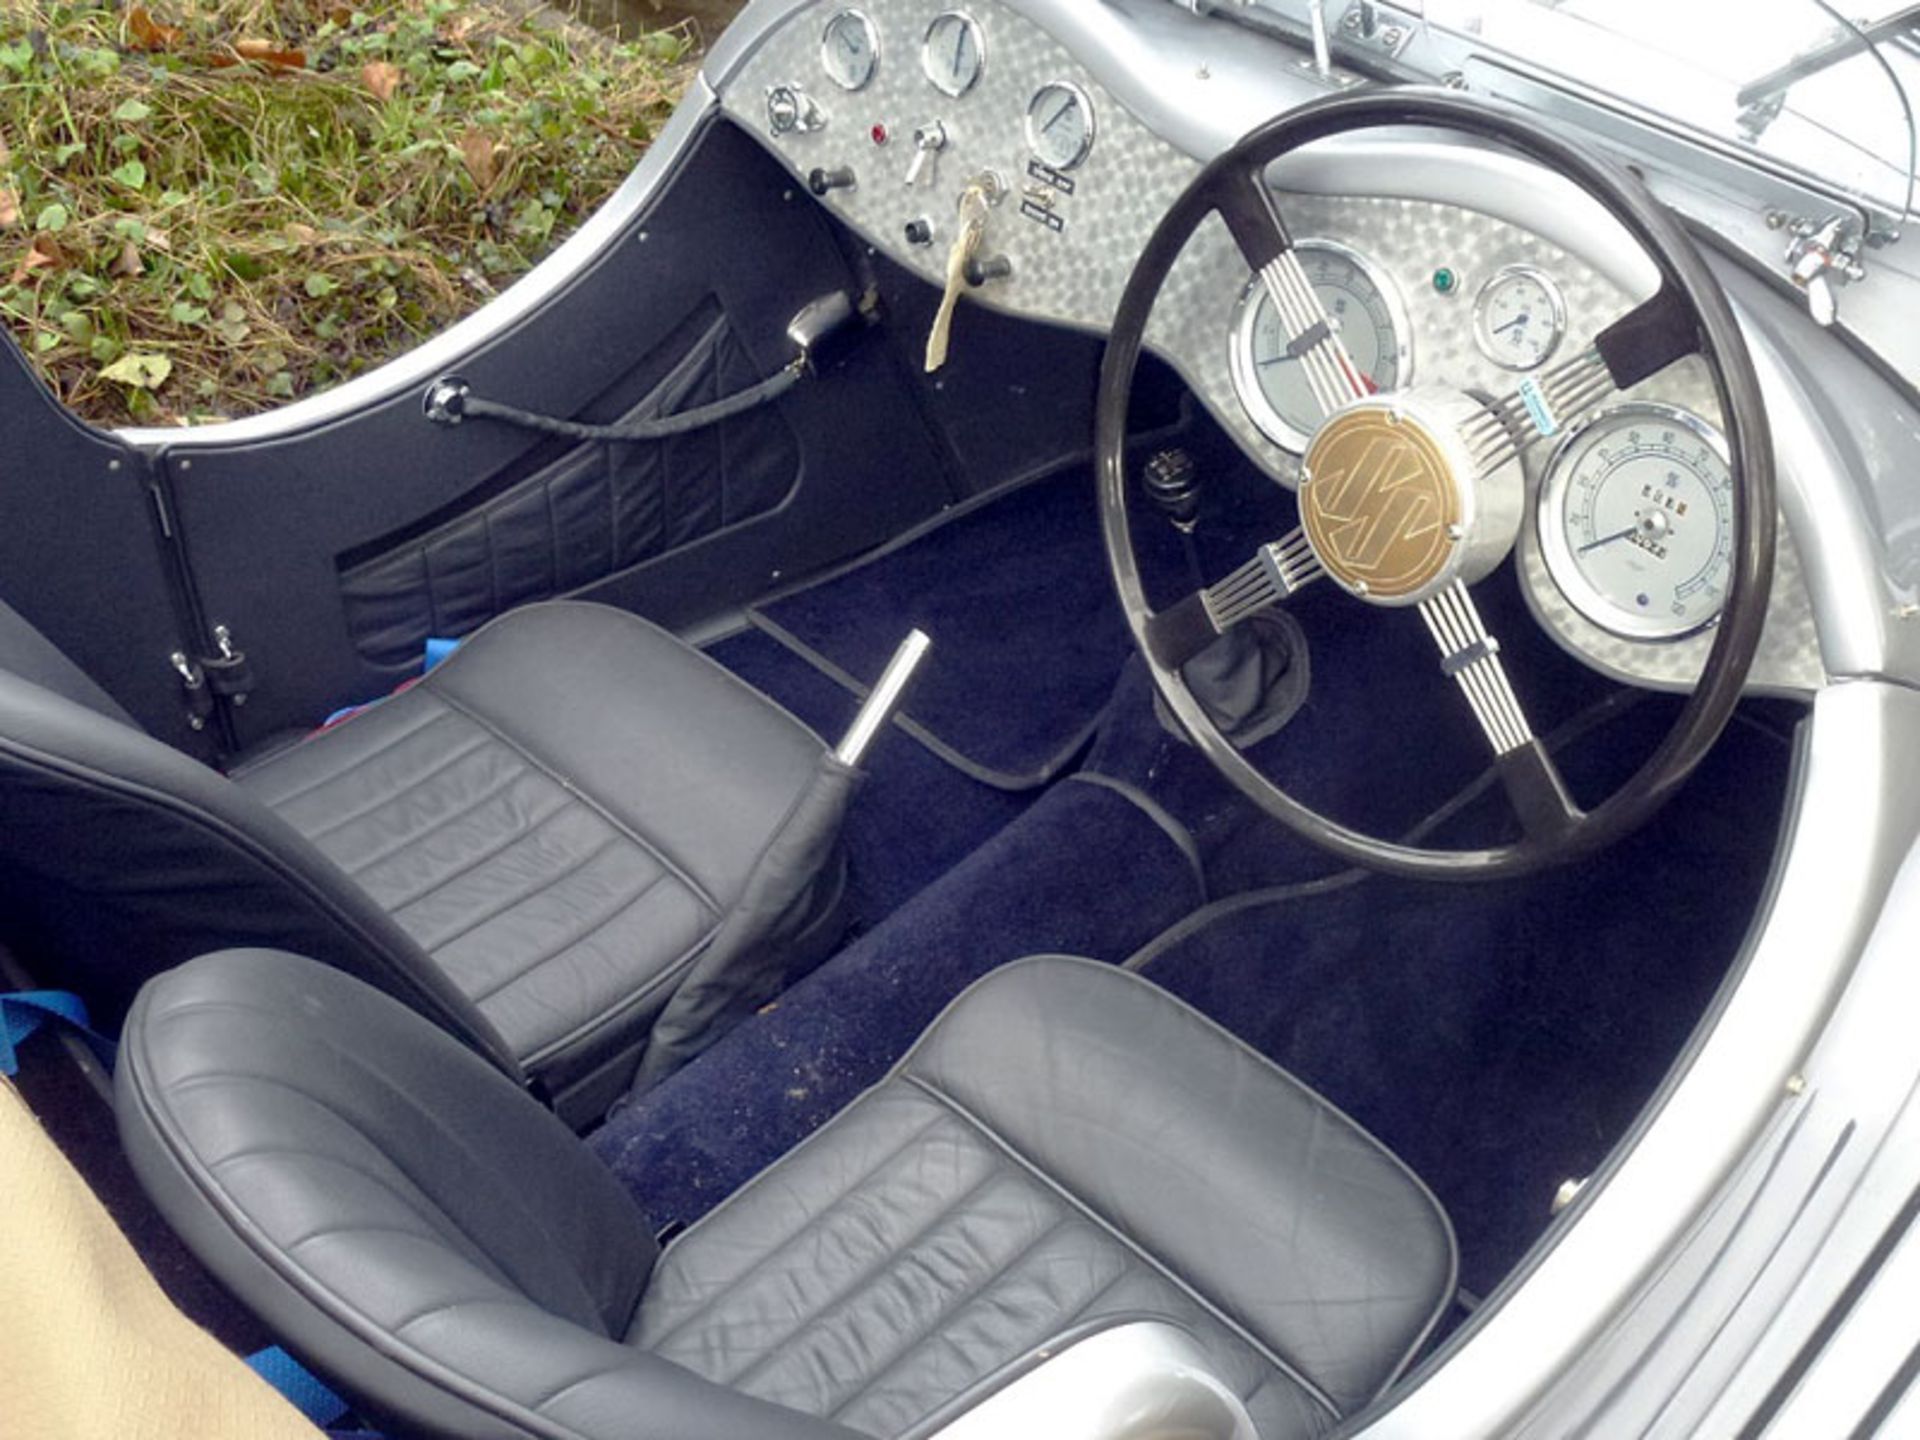 1970/2005 Suffolk SS100 Evocation - Image 7 of 10